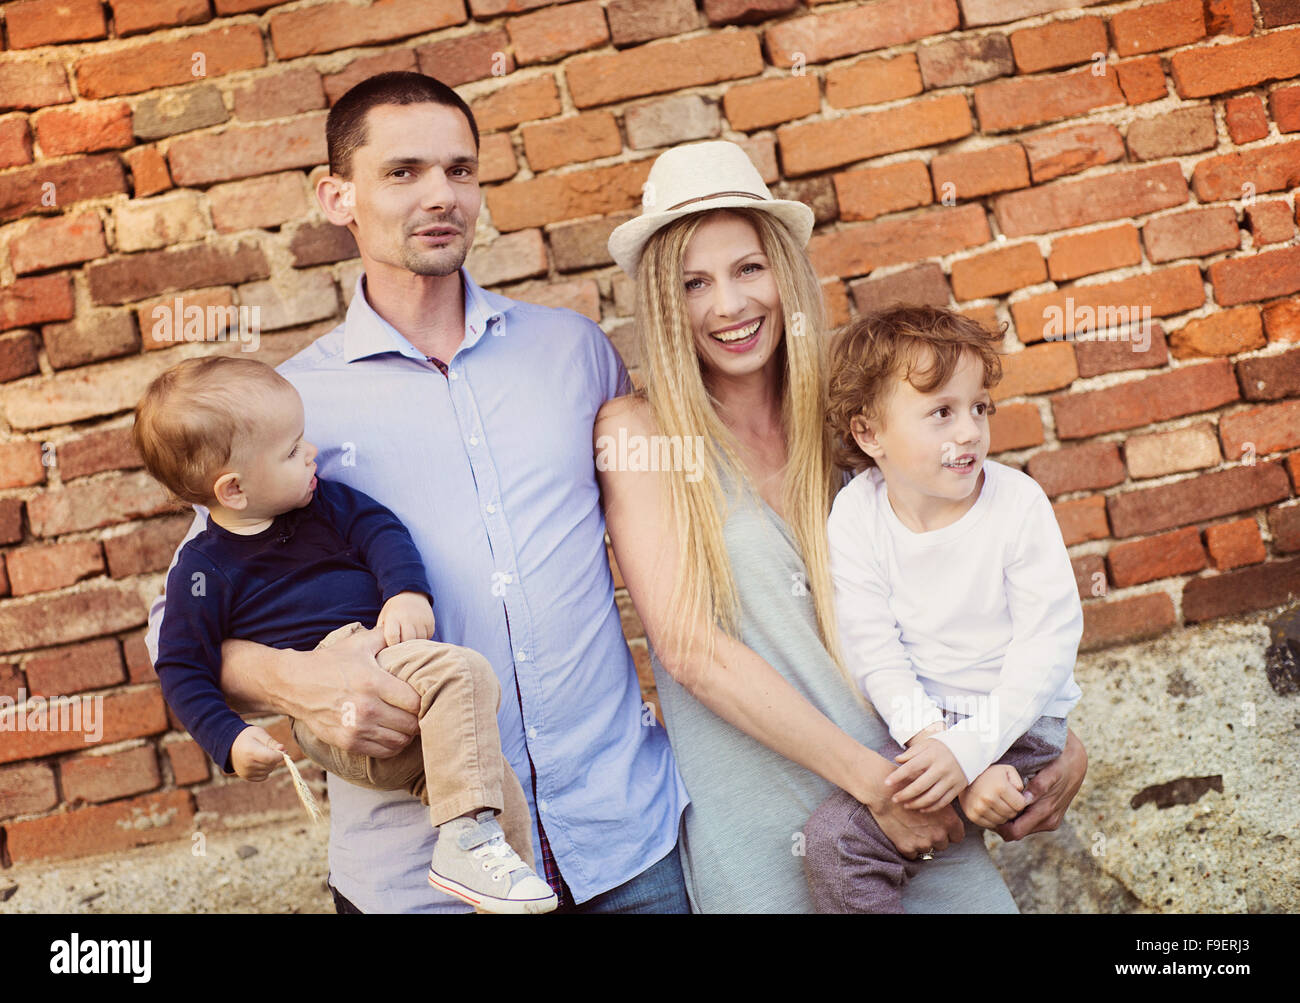 Happy young family spending time together outside by the brick wall. Stock Photo